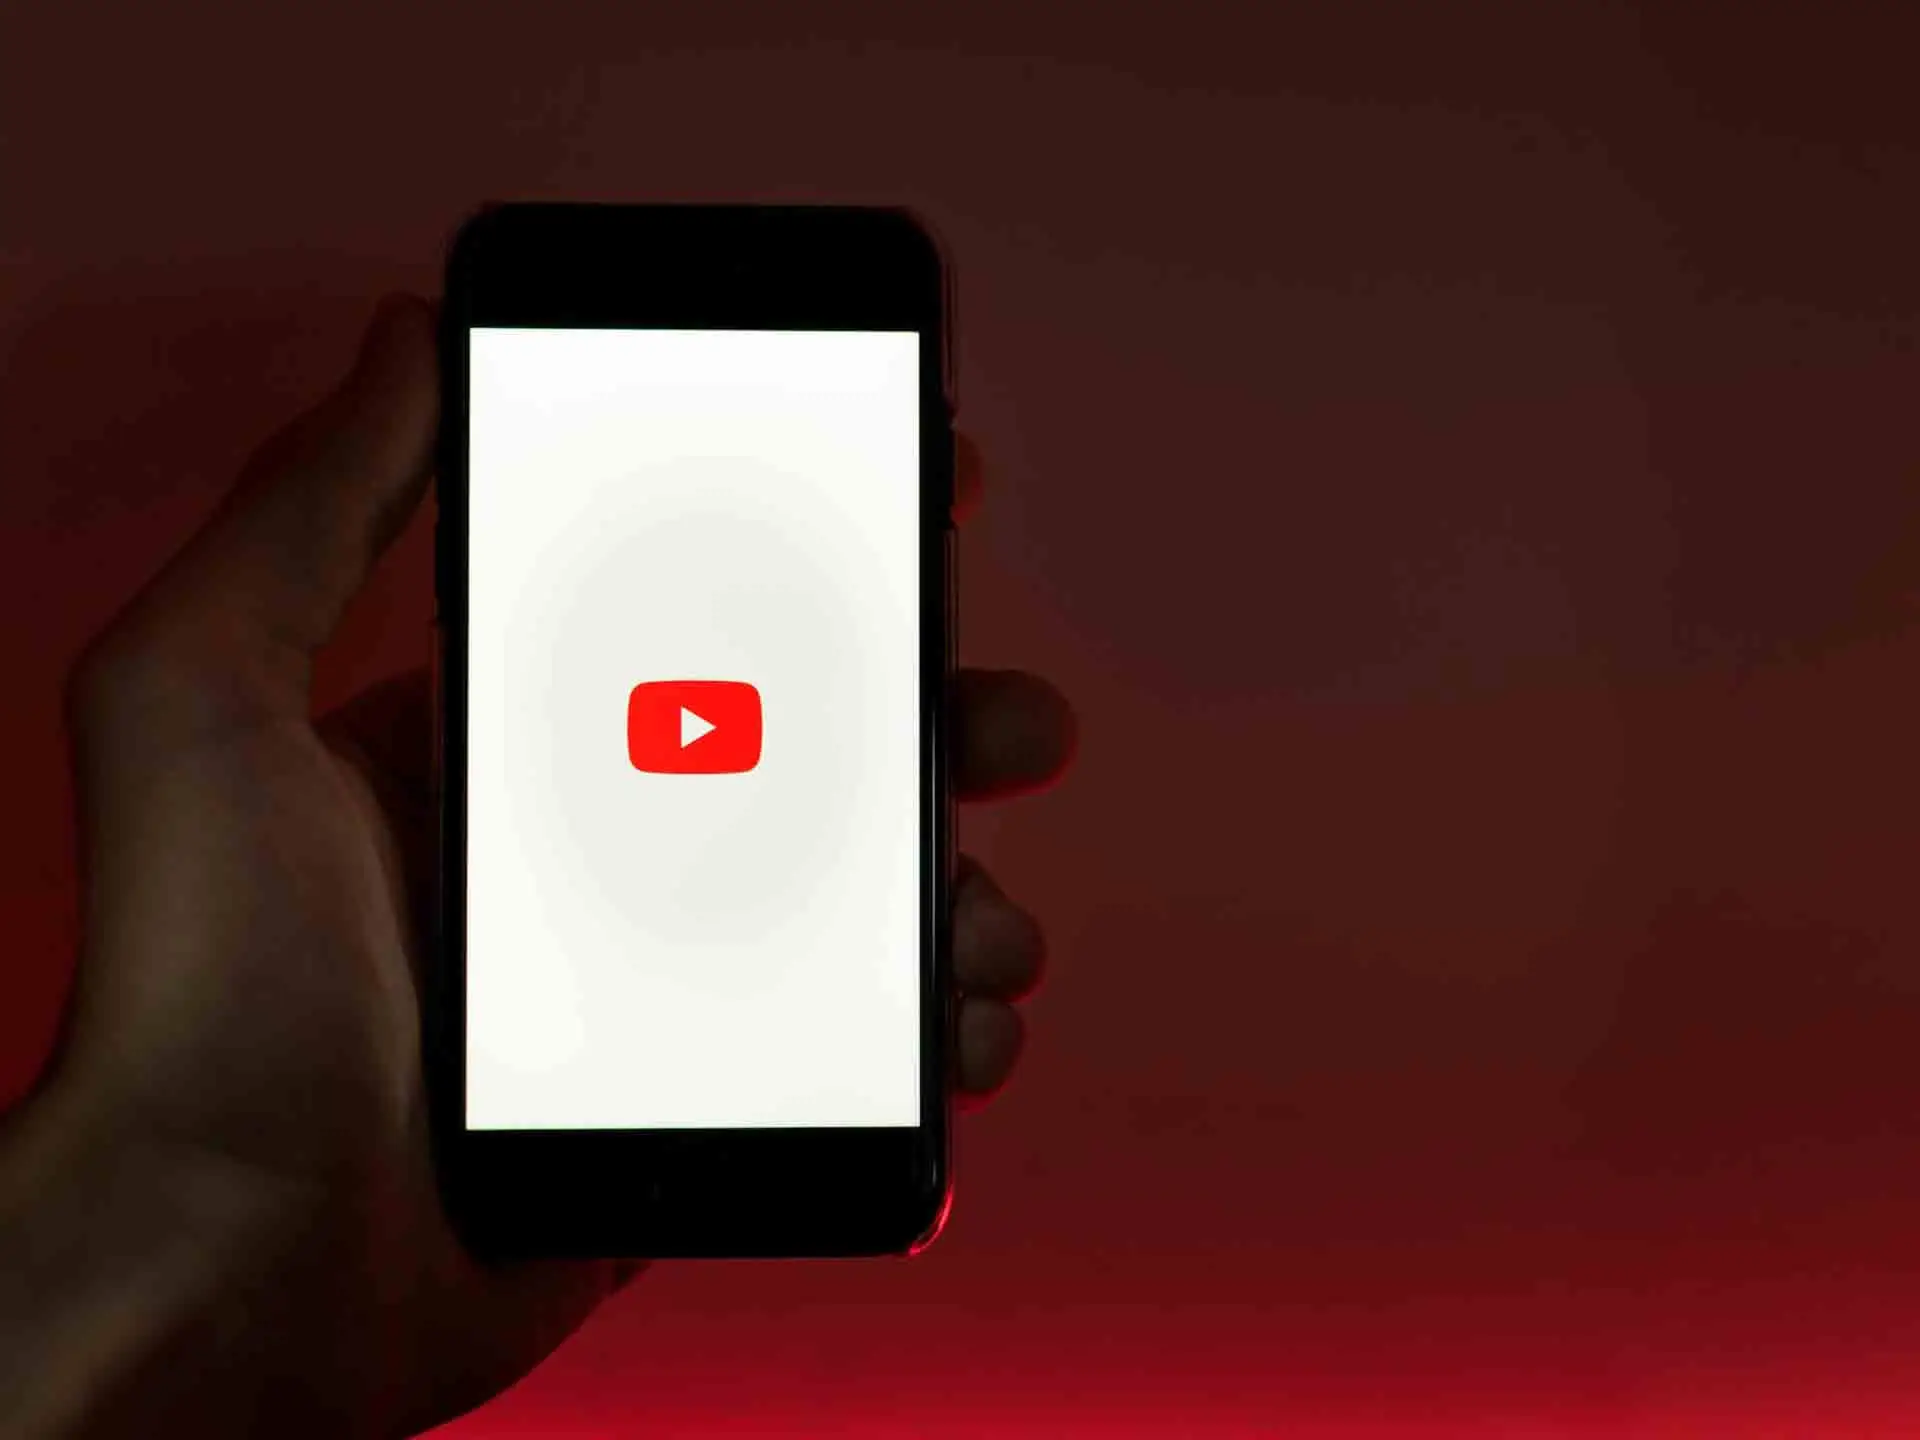 A hand holding a cellphone with YouTube icon on its screen.